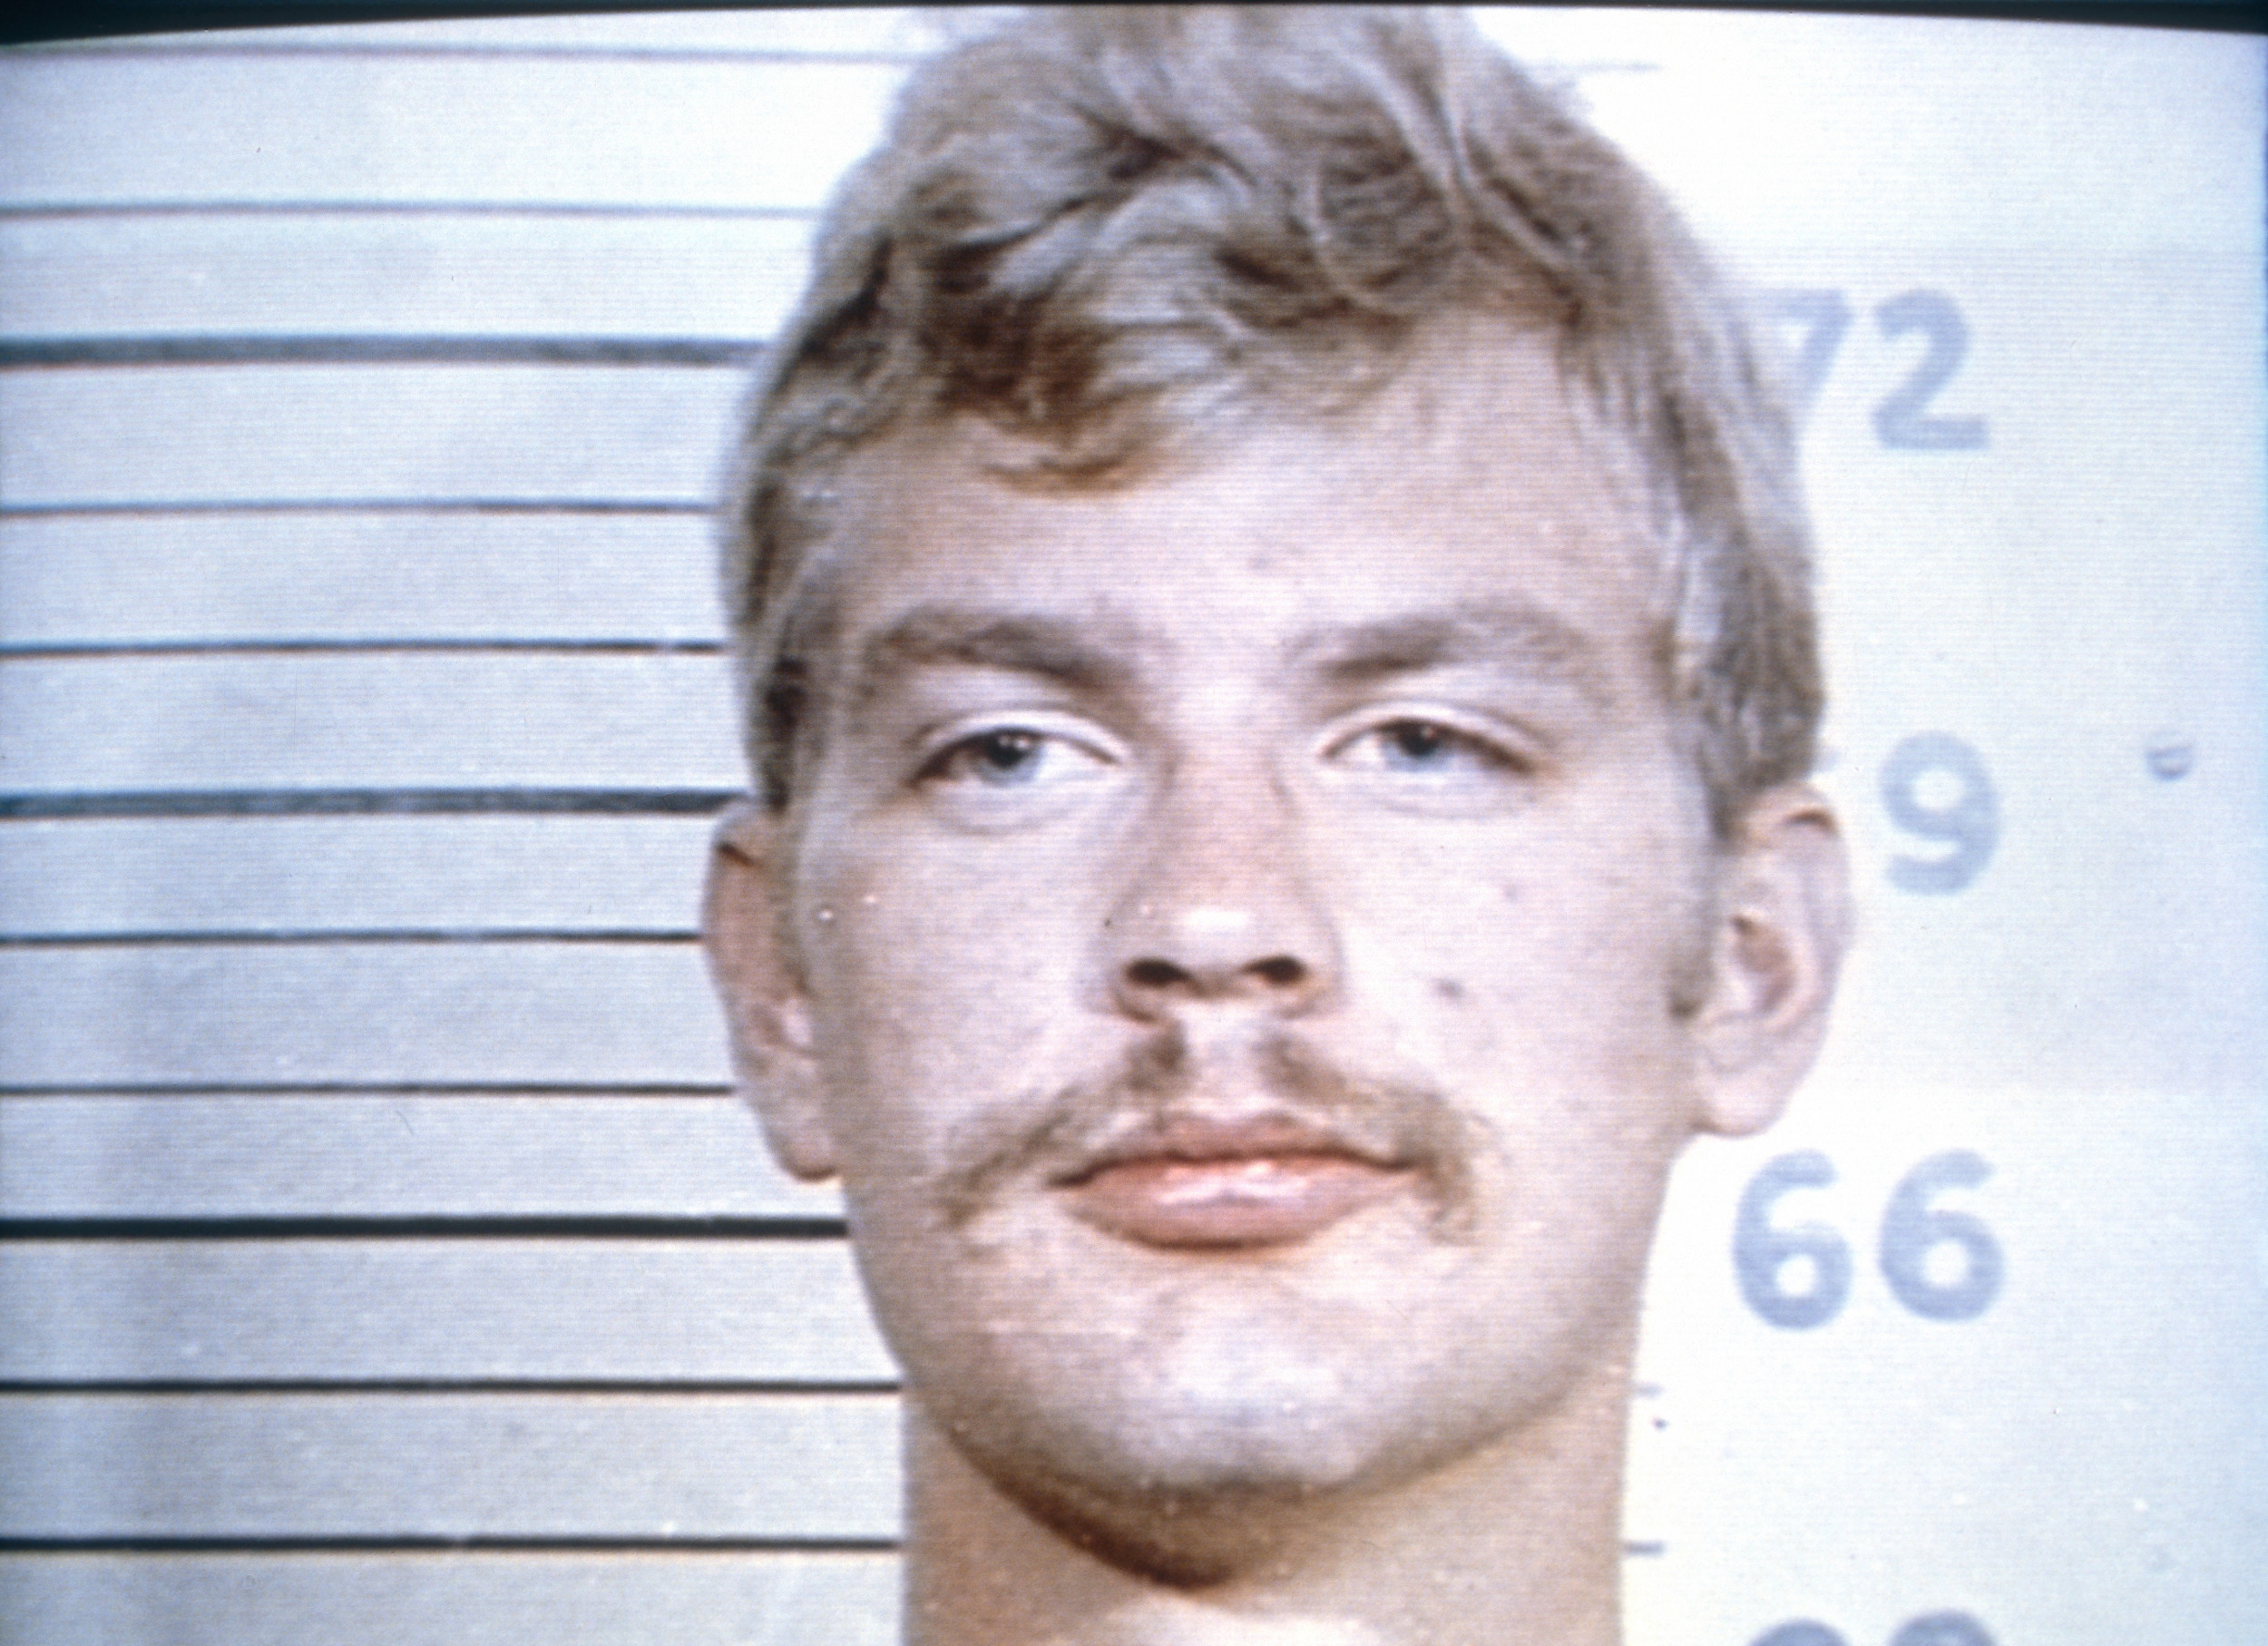 Netflix's Jeffrey Dahmer drama attracts huge ratings and strong